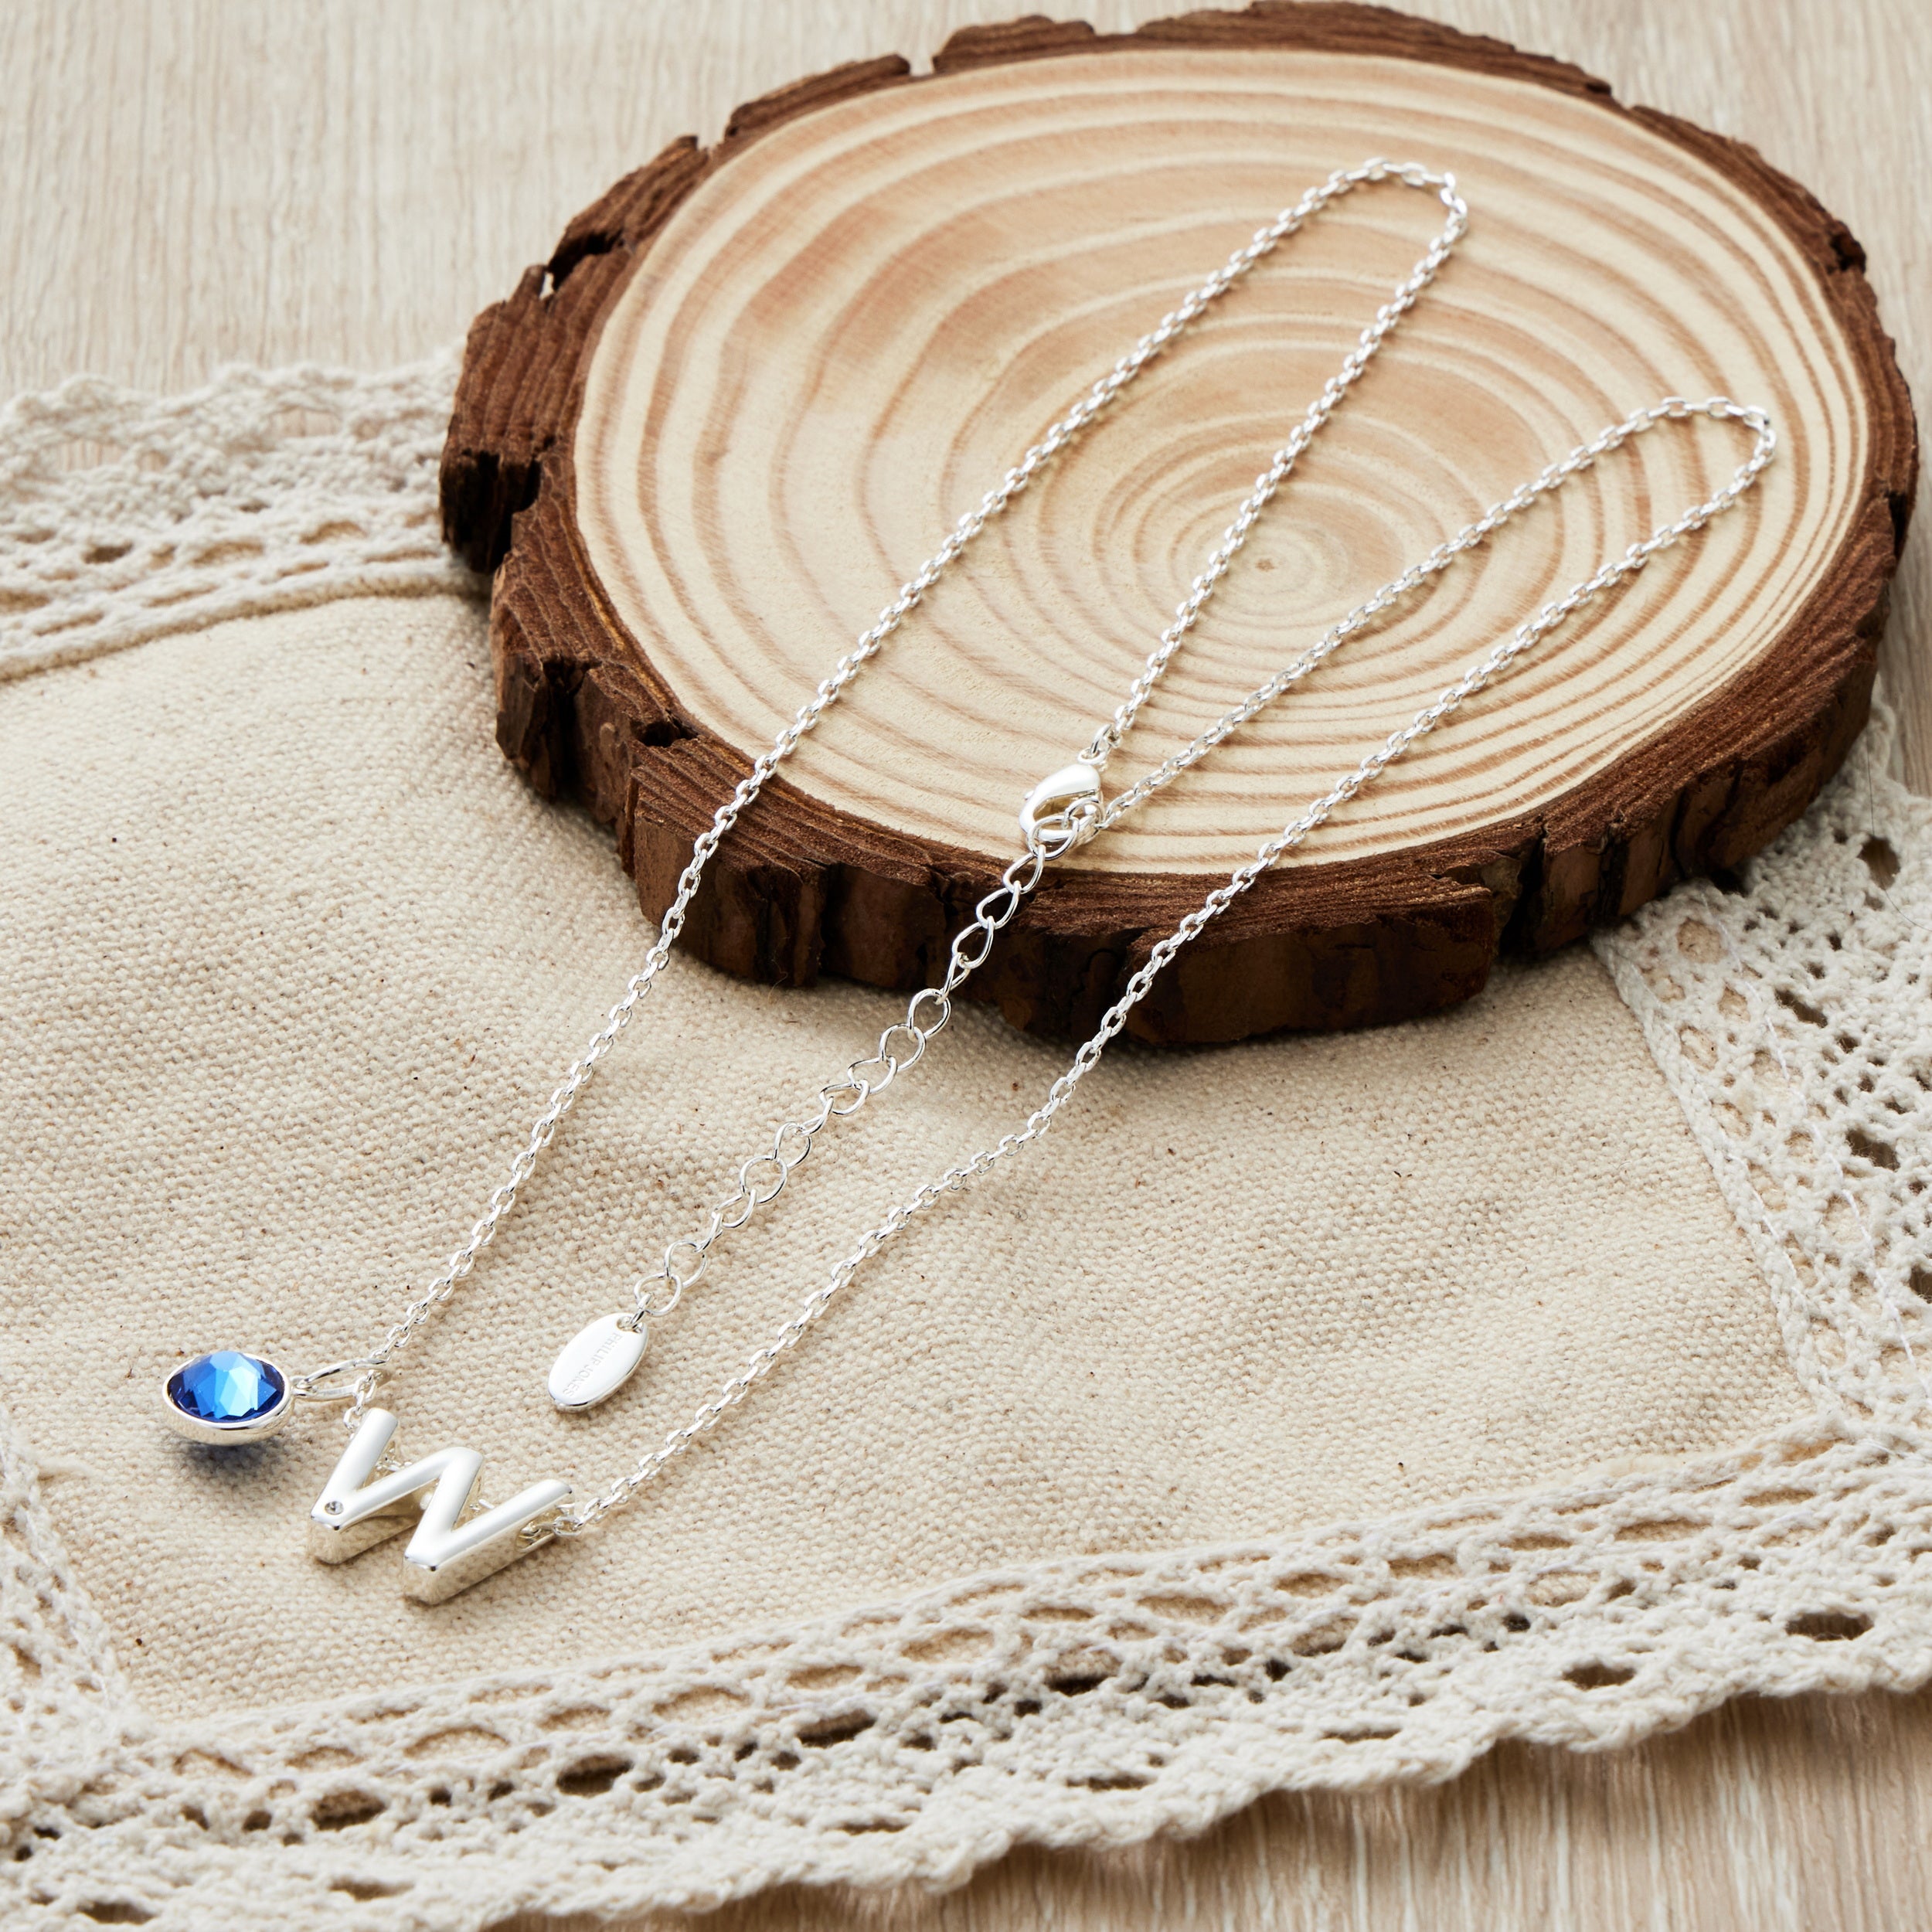 Initial W Necklace with Birthstone Charm Created with Zircondia® Crystals